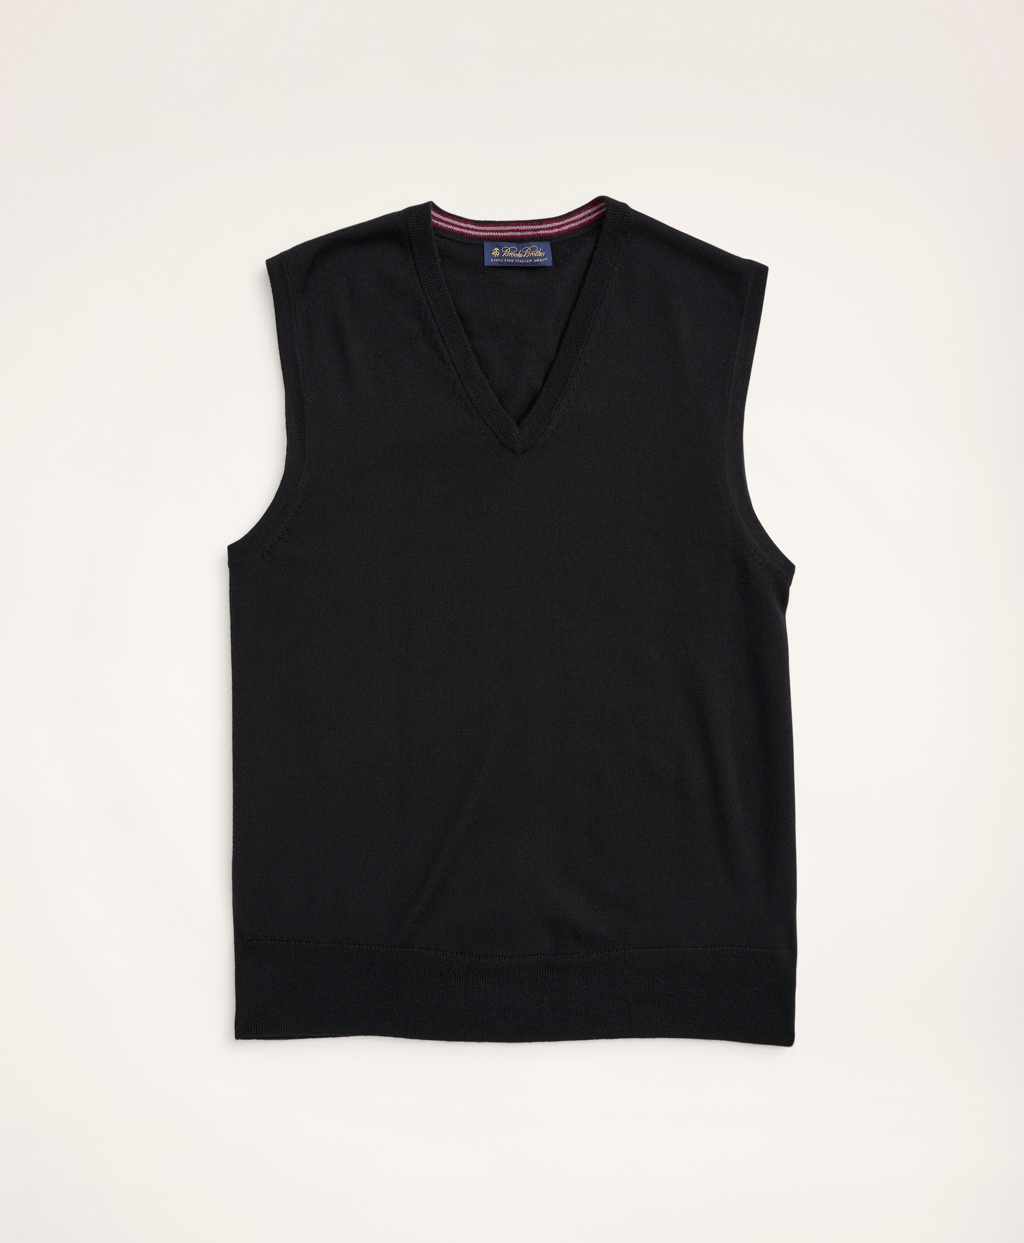 Mens Dissident Pure Cotton Vest Round Neck Sleeveless Contrast Mesh Tank Top Tee